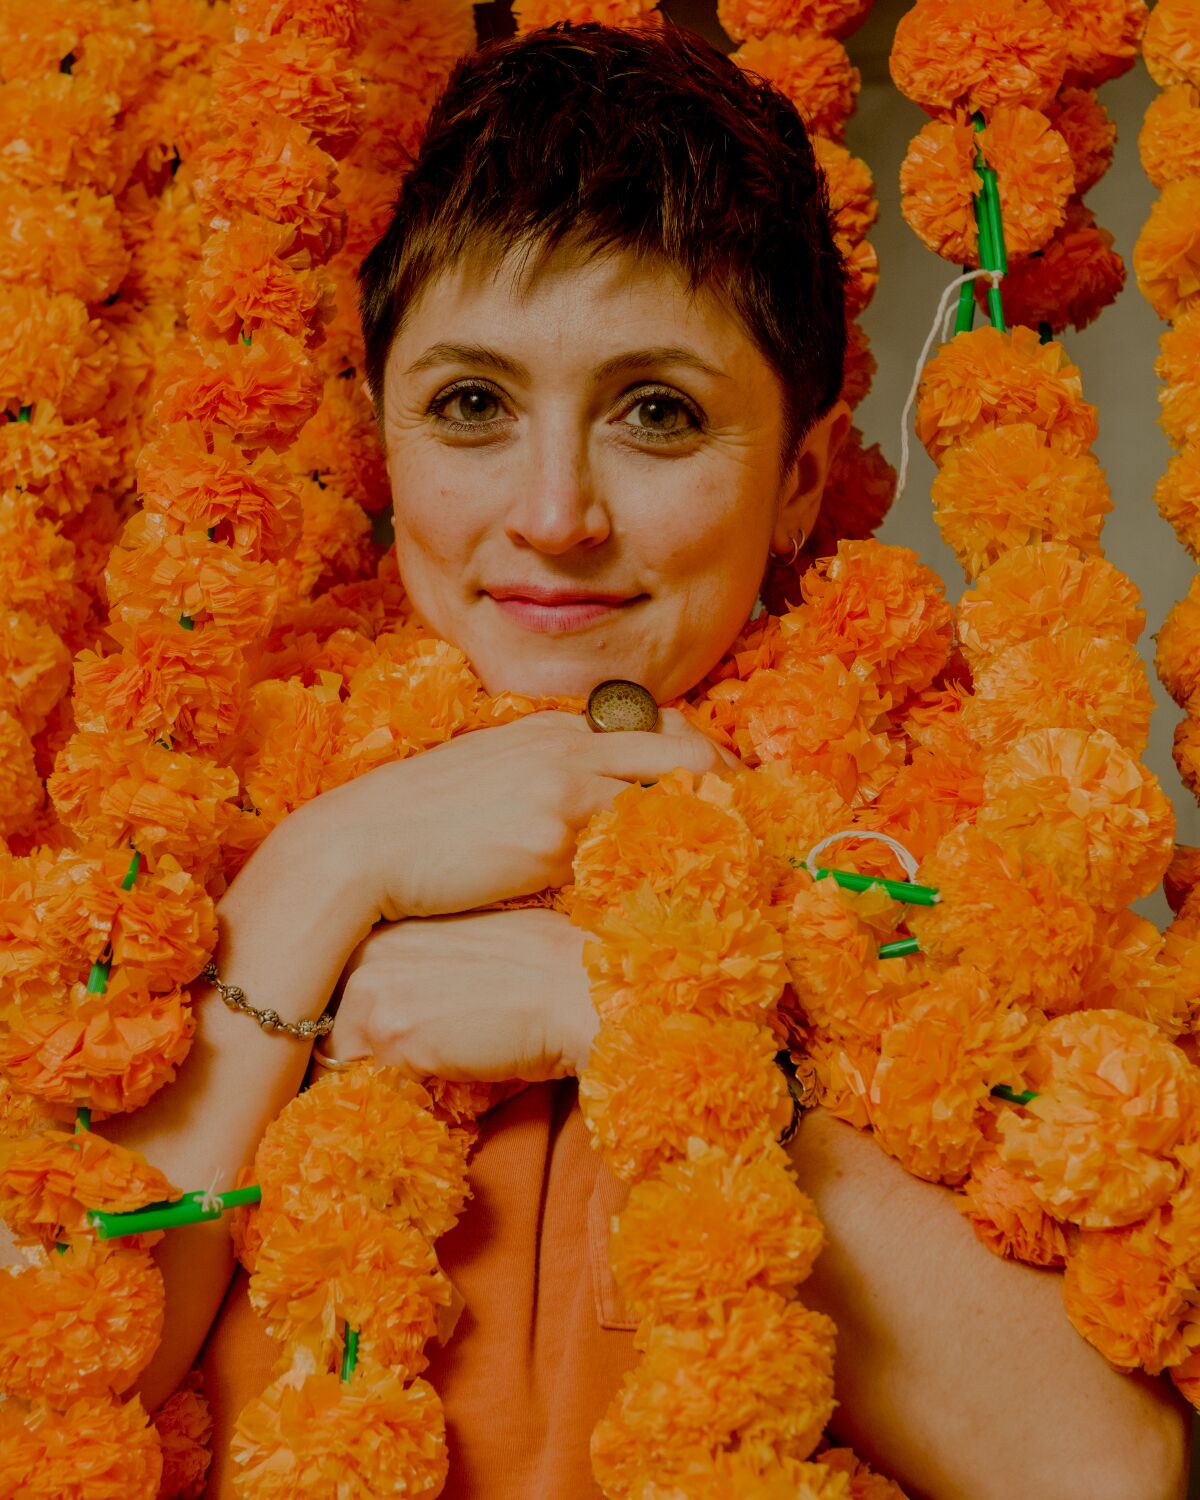 Tallie Medel poses for a portrait surrounded by orange flower blossoms.